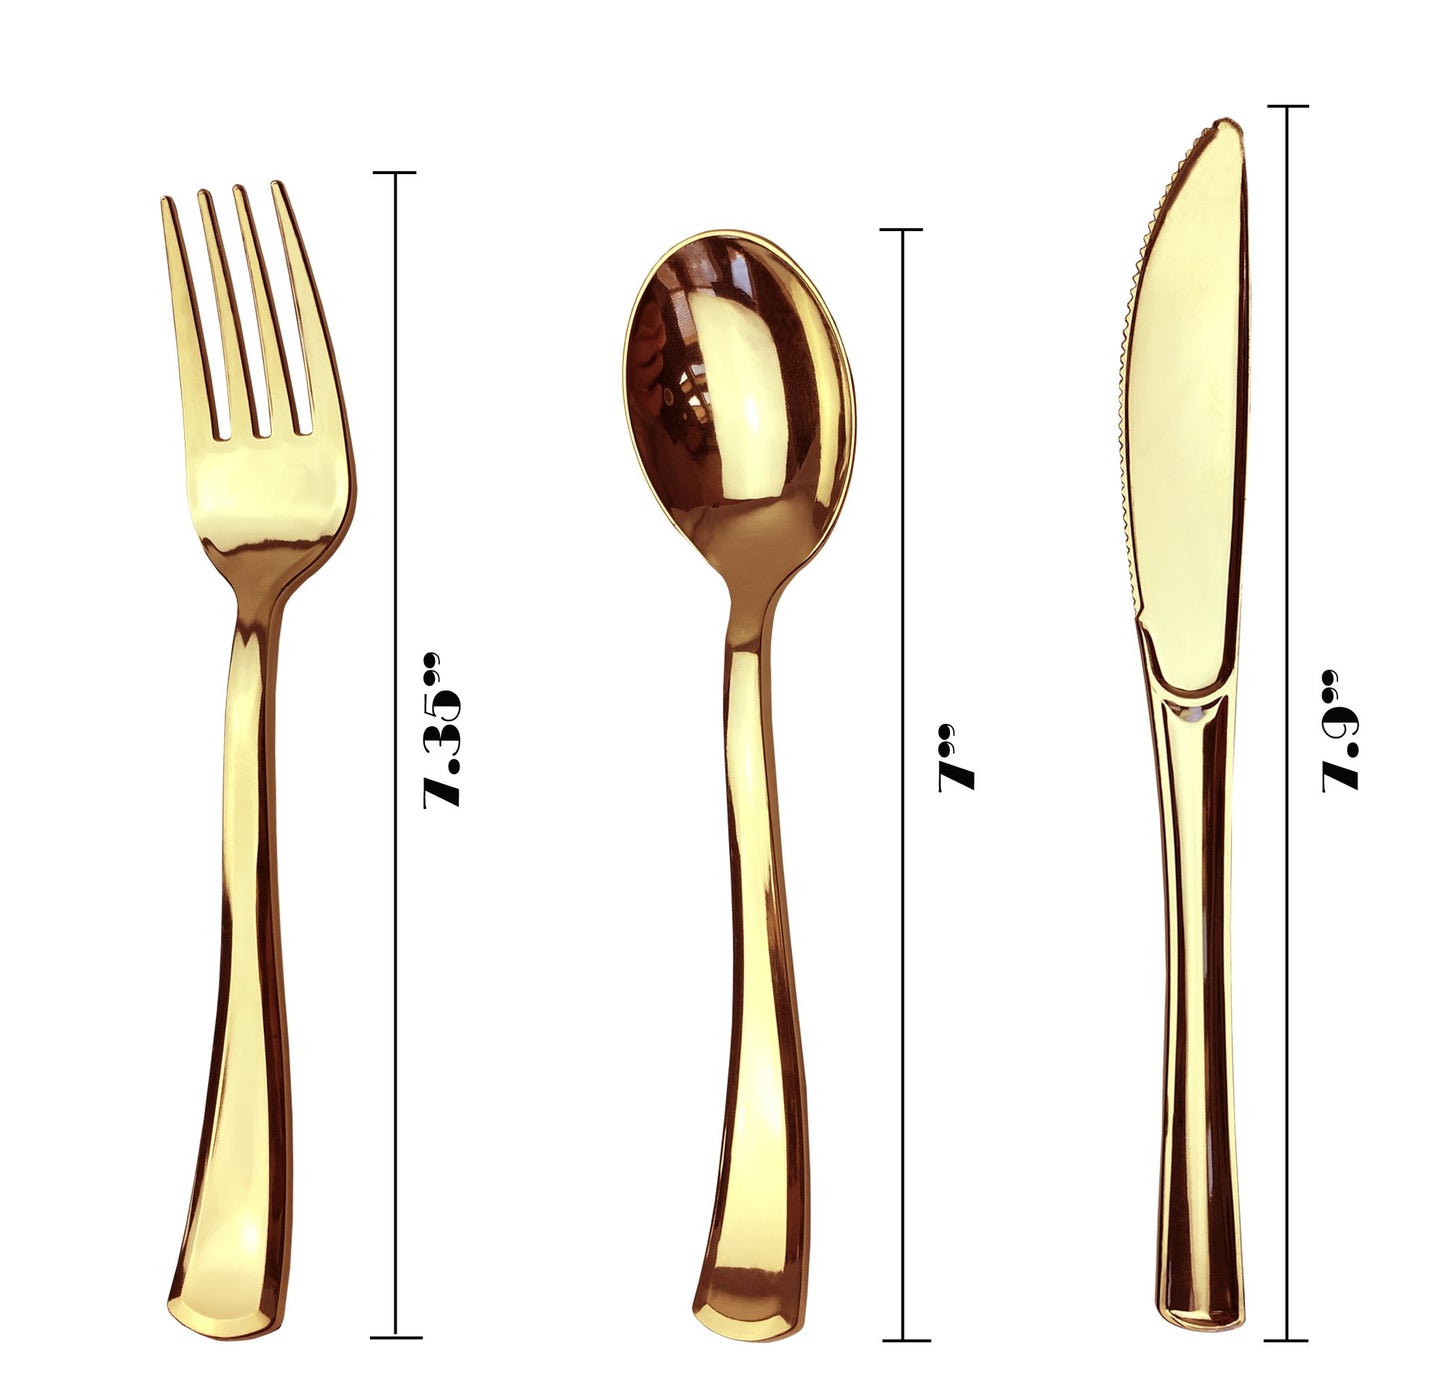 JL Prime 120 Gold Plastic Silverware Set, Gold Plastic Cutlery Set, Heavy Duty Utensils for Party and Wedding, Disposable Gold Flatware, 40 Plastic Forks, 40 Plastic Spoons, 40 Plastic Knives